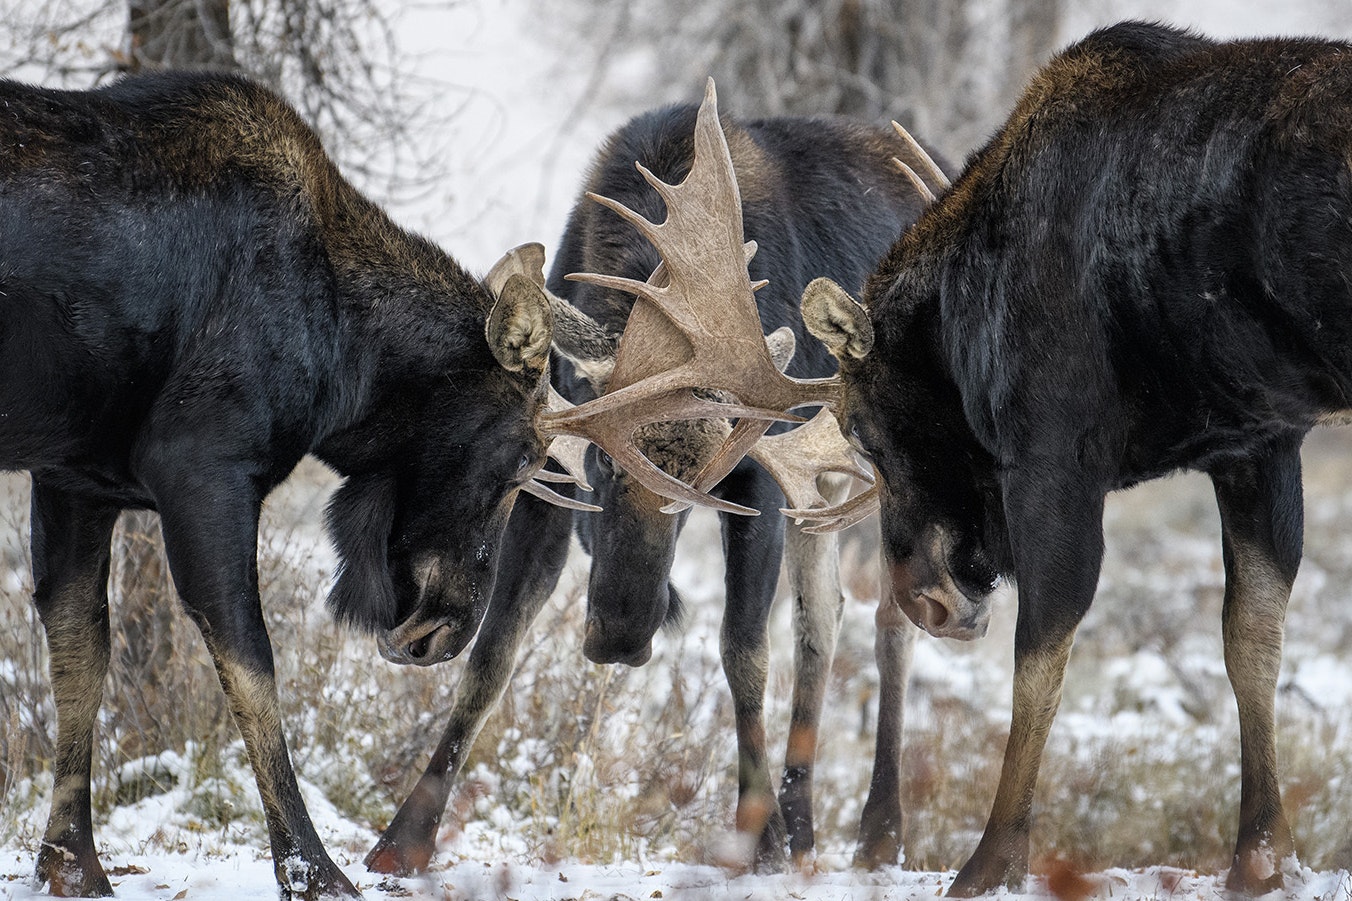 Three-way shoving matches aren’t particularly uncommon among Wyoming bull moose gearing up for the rut (mating season), as evidenced by this recent photo from the Teton region.